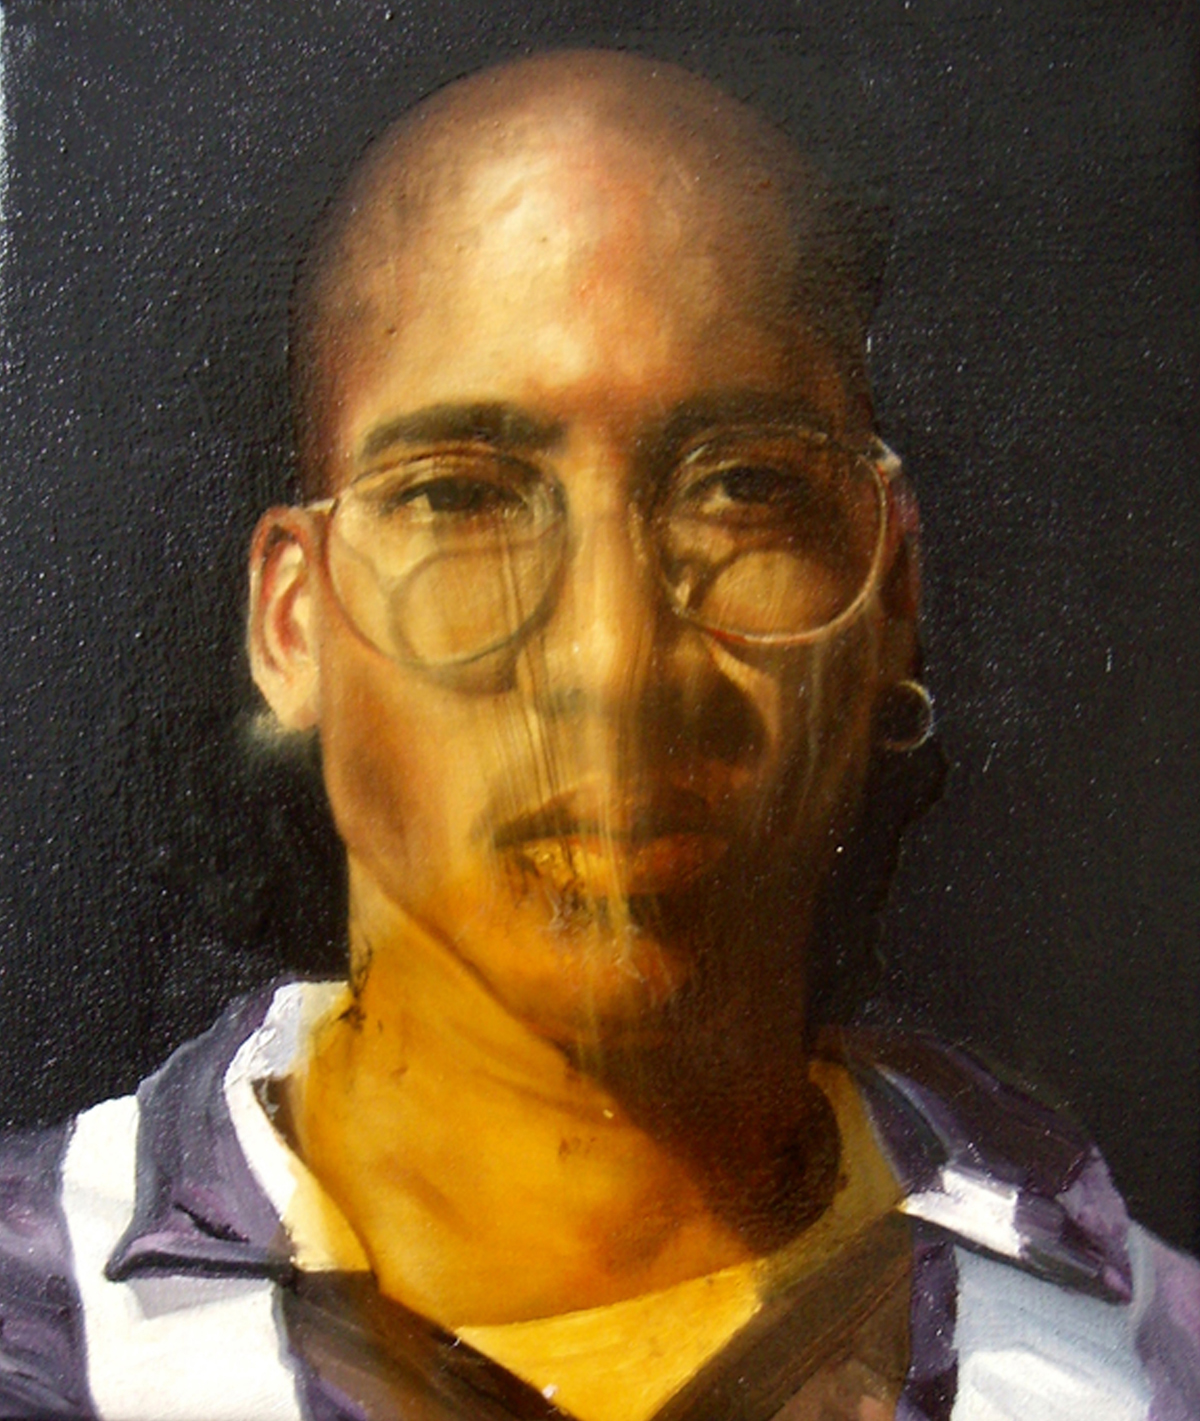 Kevin Hope (1996), Oil on Canvas, 35 x 30cm